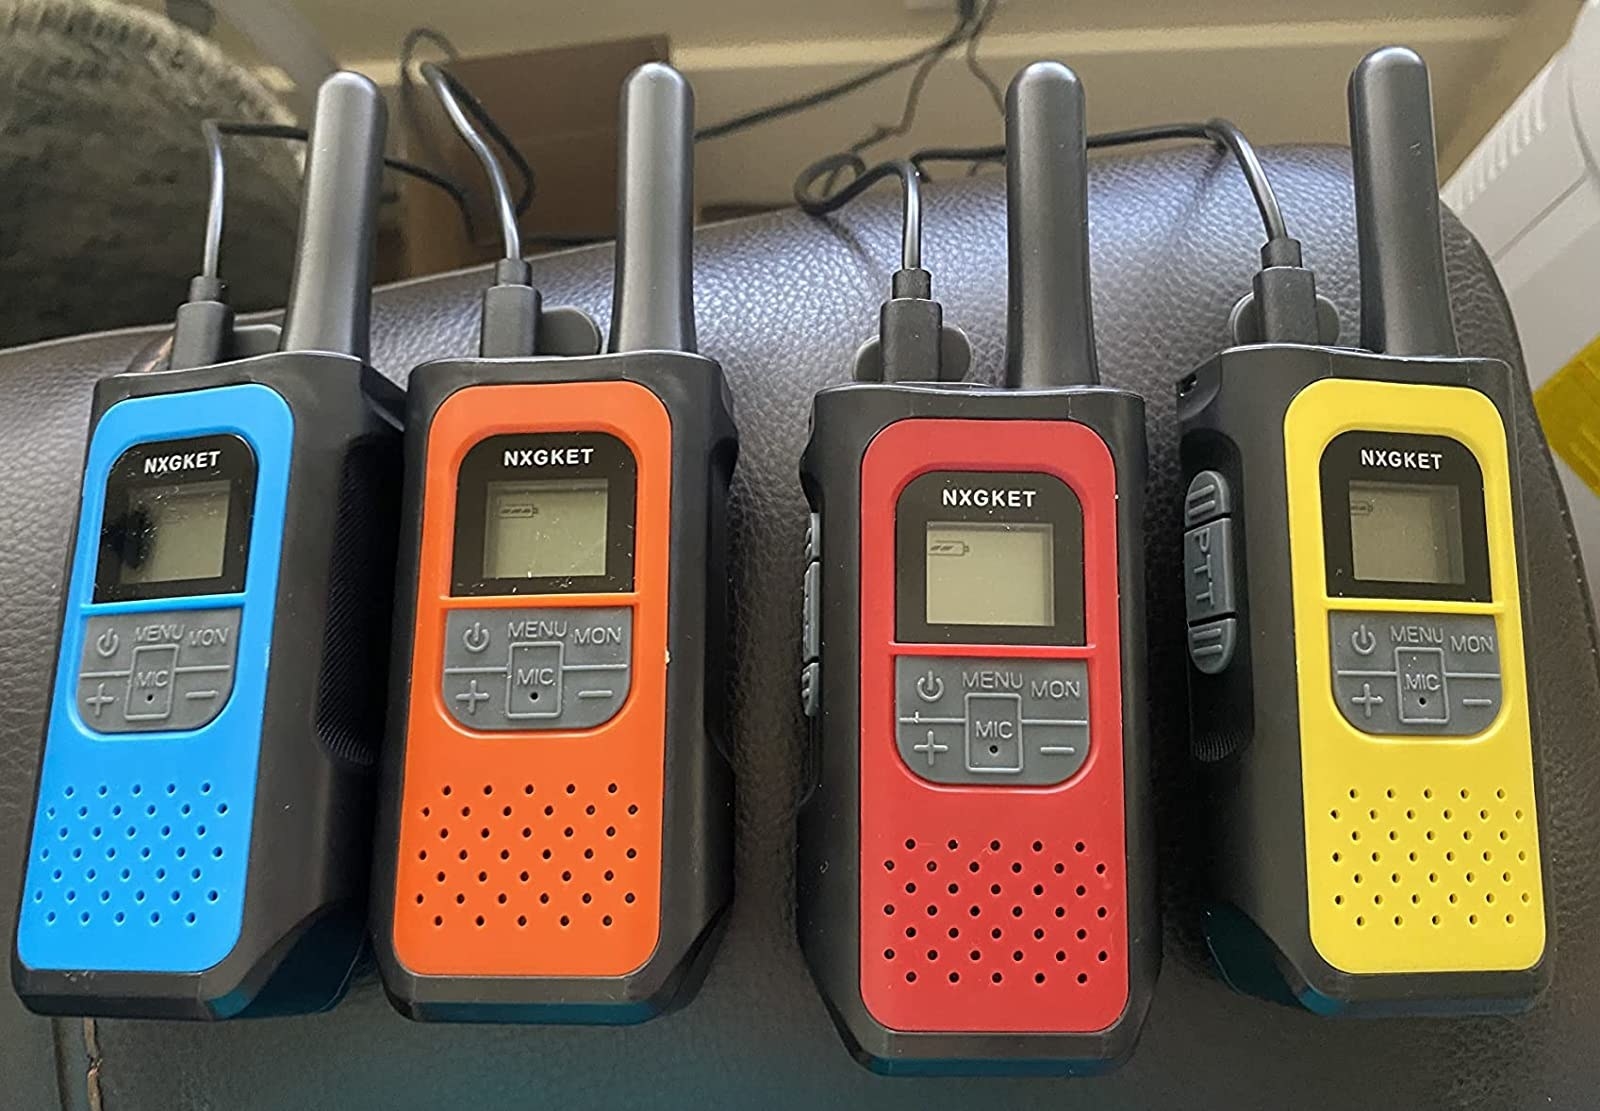 the four radios; one blue, one orange, one red, and one yellow